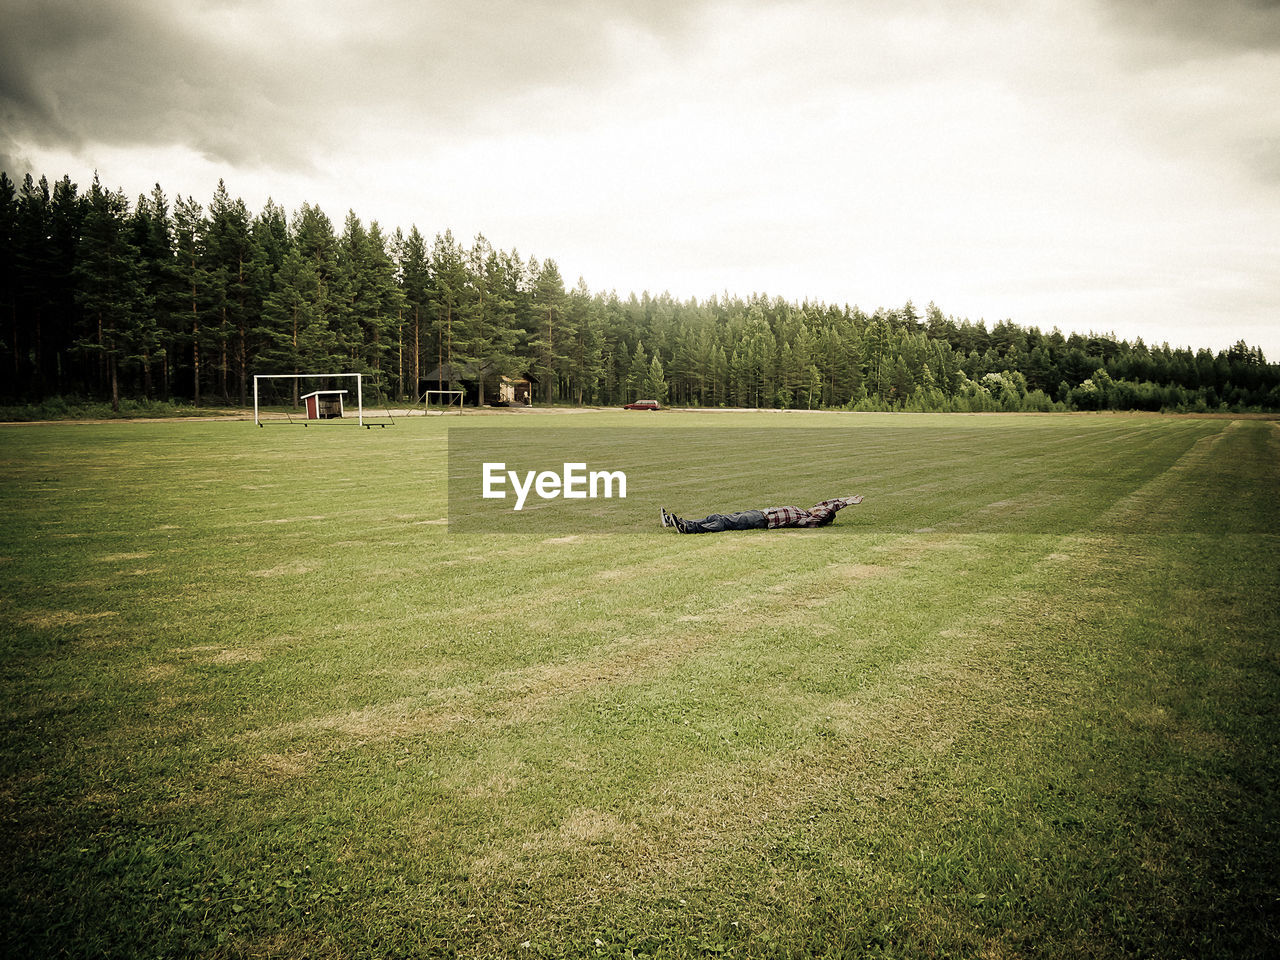 A person lying on a soccer flied in the woods